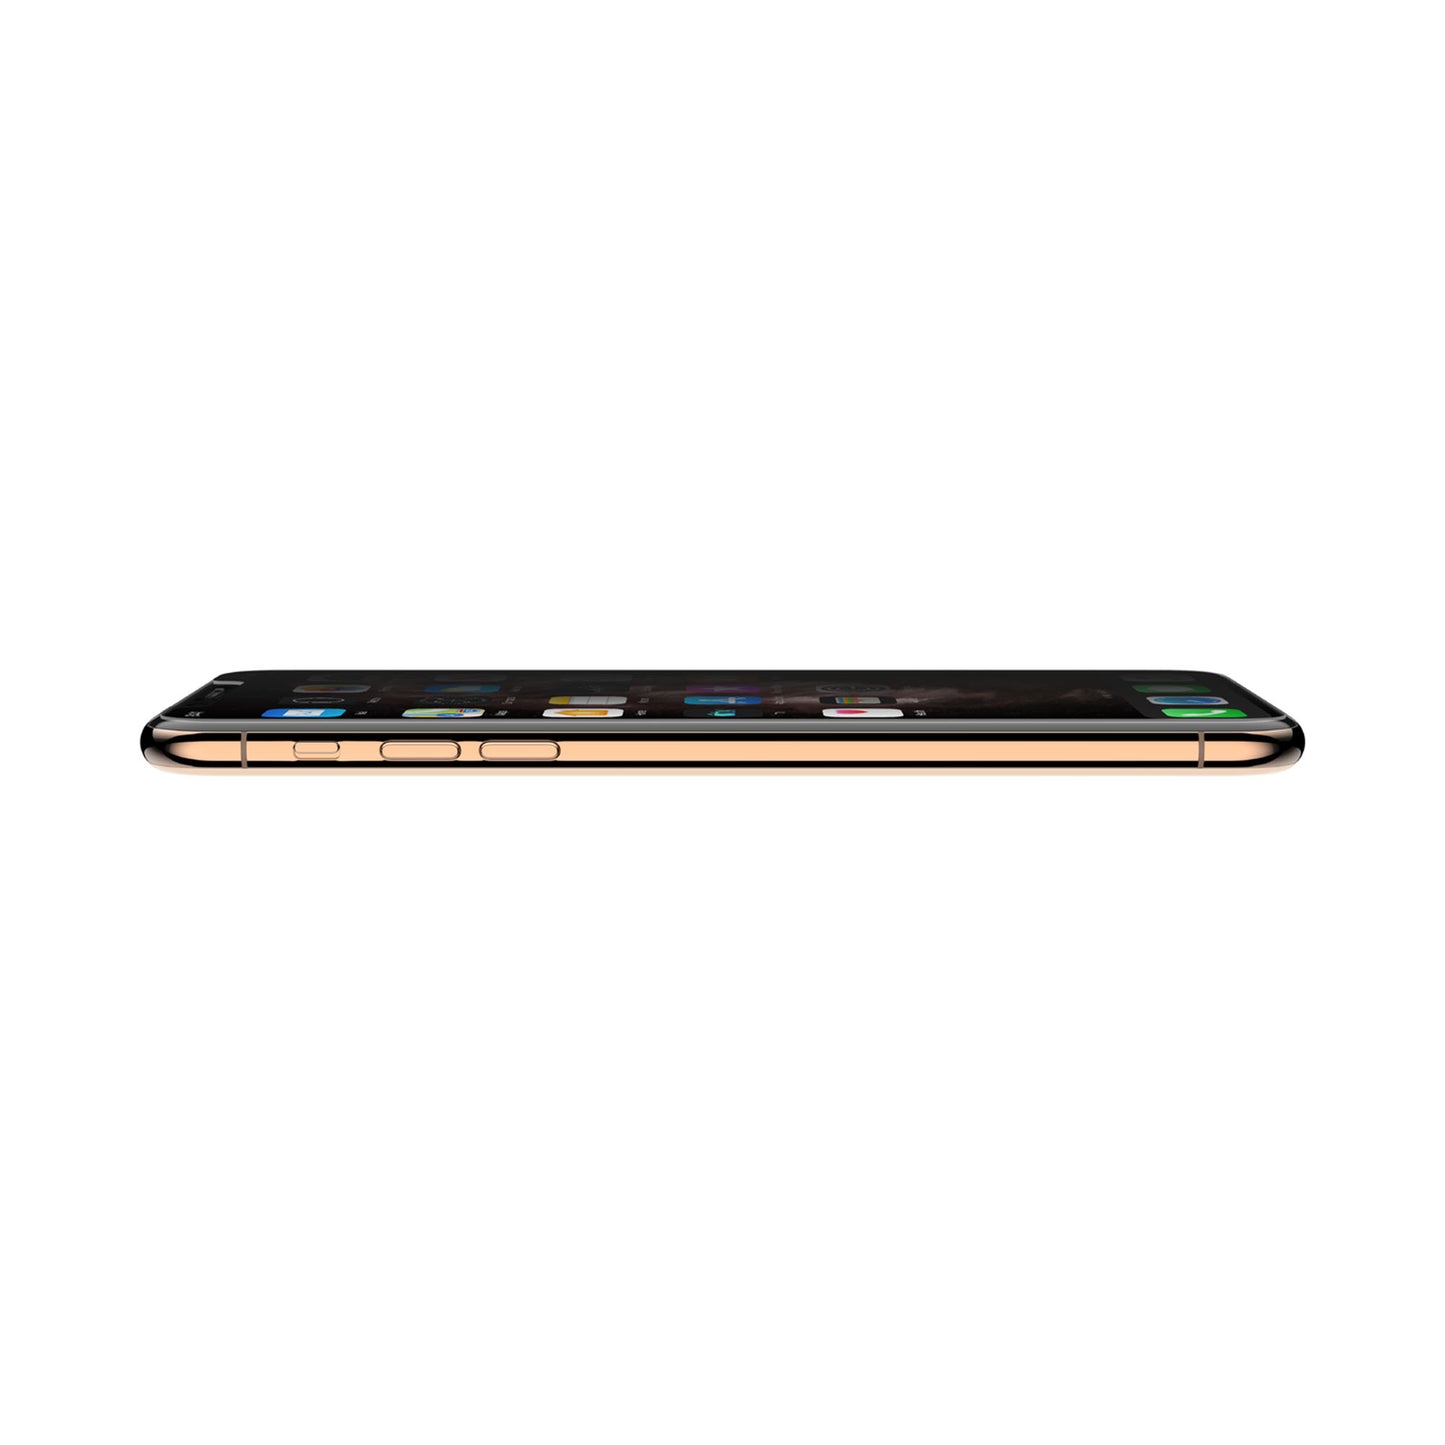 BELKIN ScreenForce Overlay for iPhone XS Max/11 Pro Max - TemperedGlass